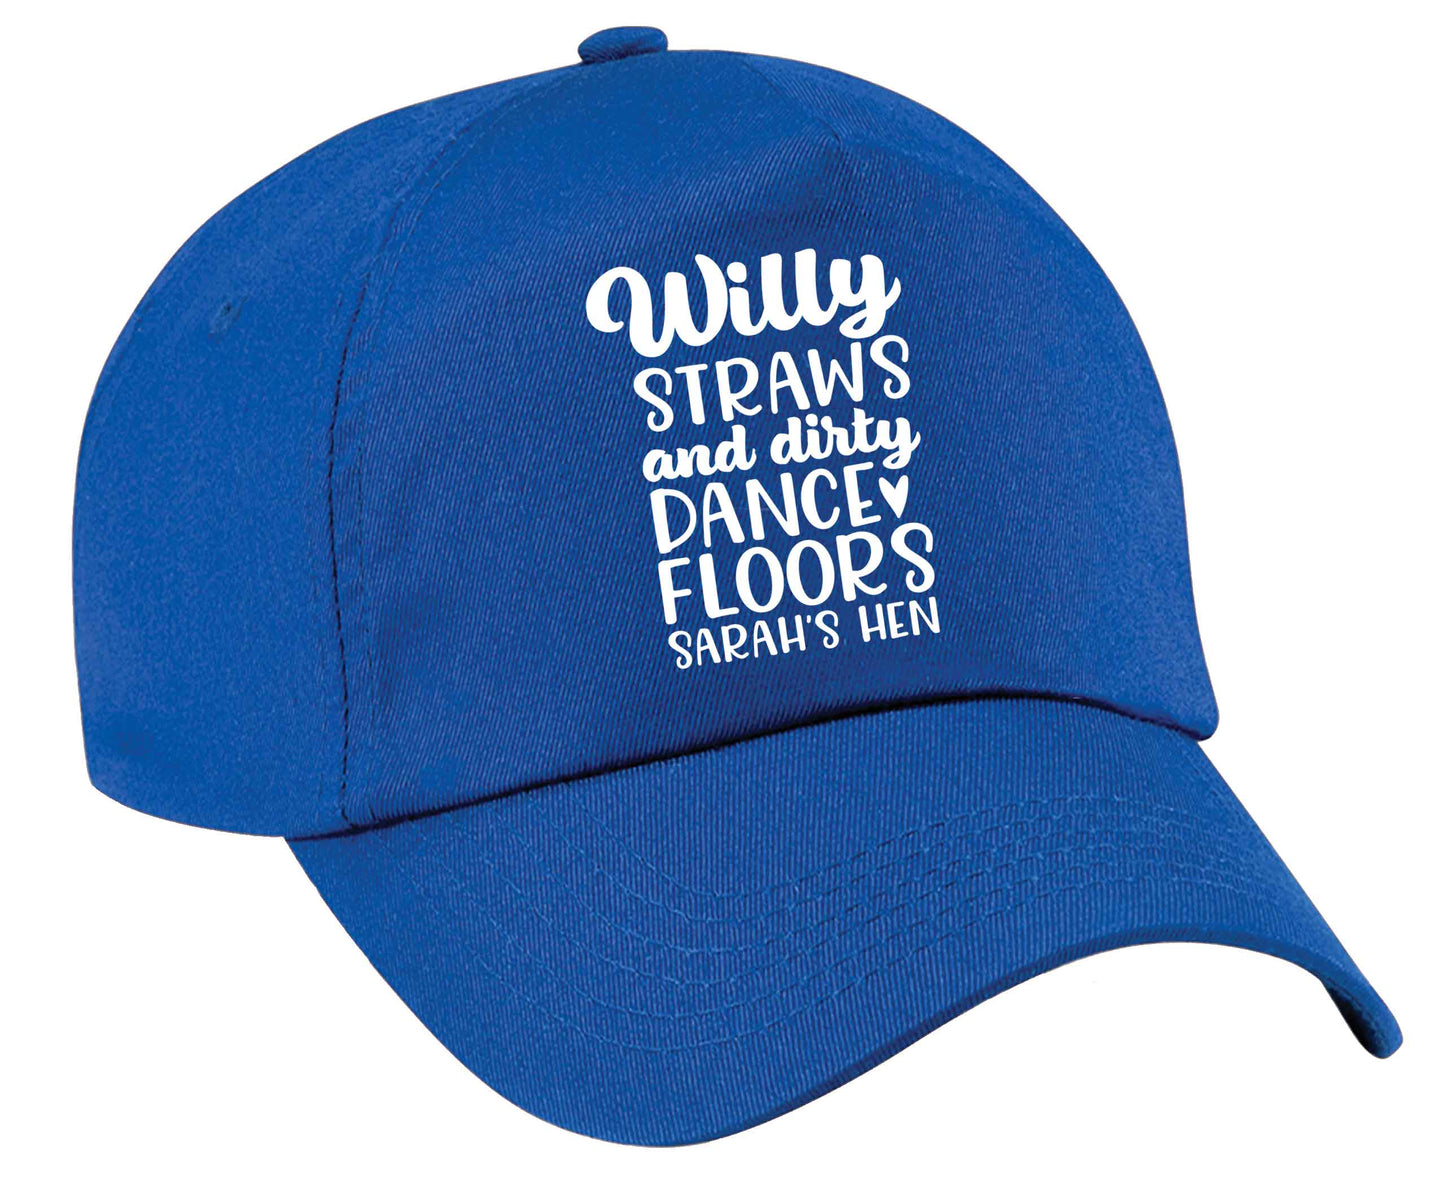 Willy straws and dirty dance floors | Baseball Cap